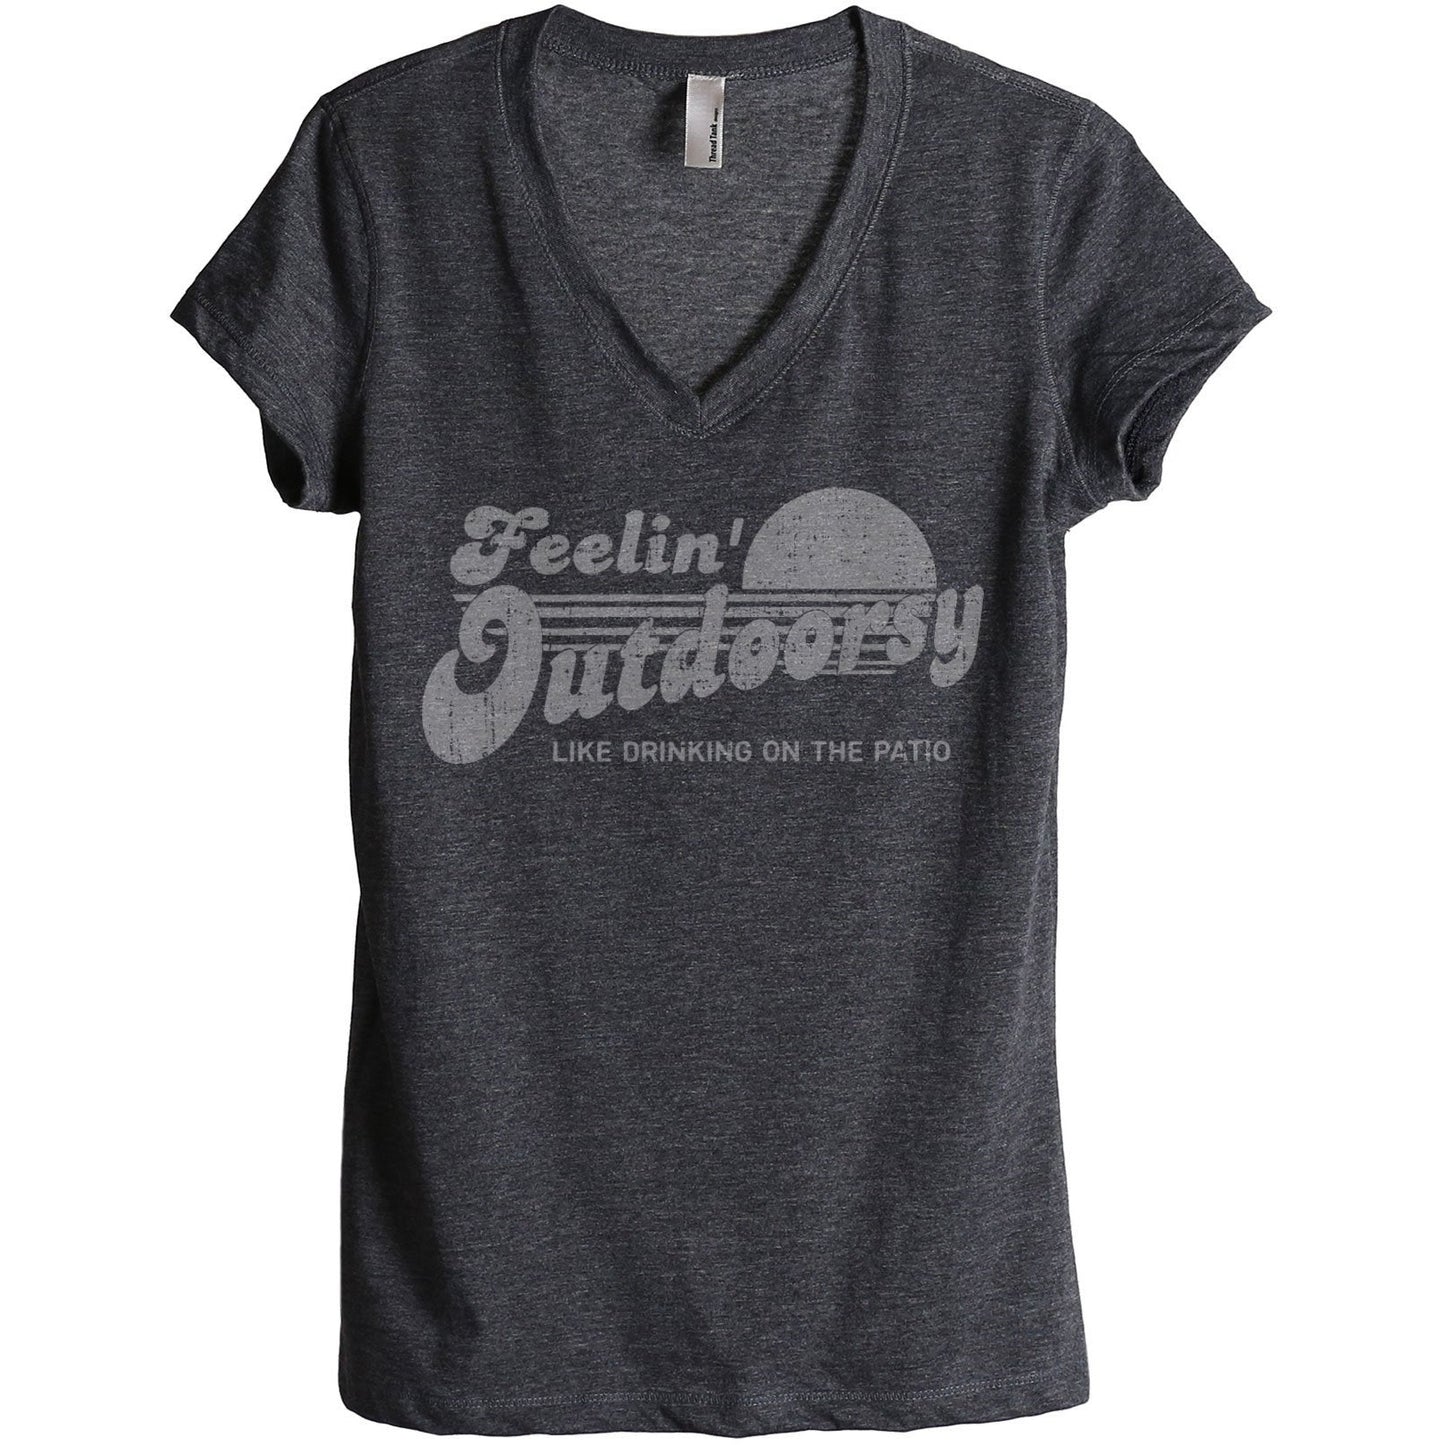 Feelin Outdoorsy Like Drinking On The Patio Women's Relaxed Crewneck T-Shirt Top Tee Charcoal Grey